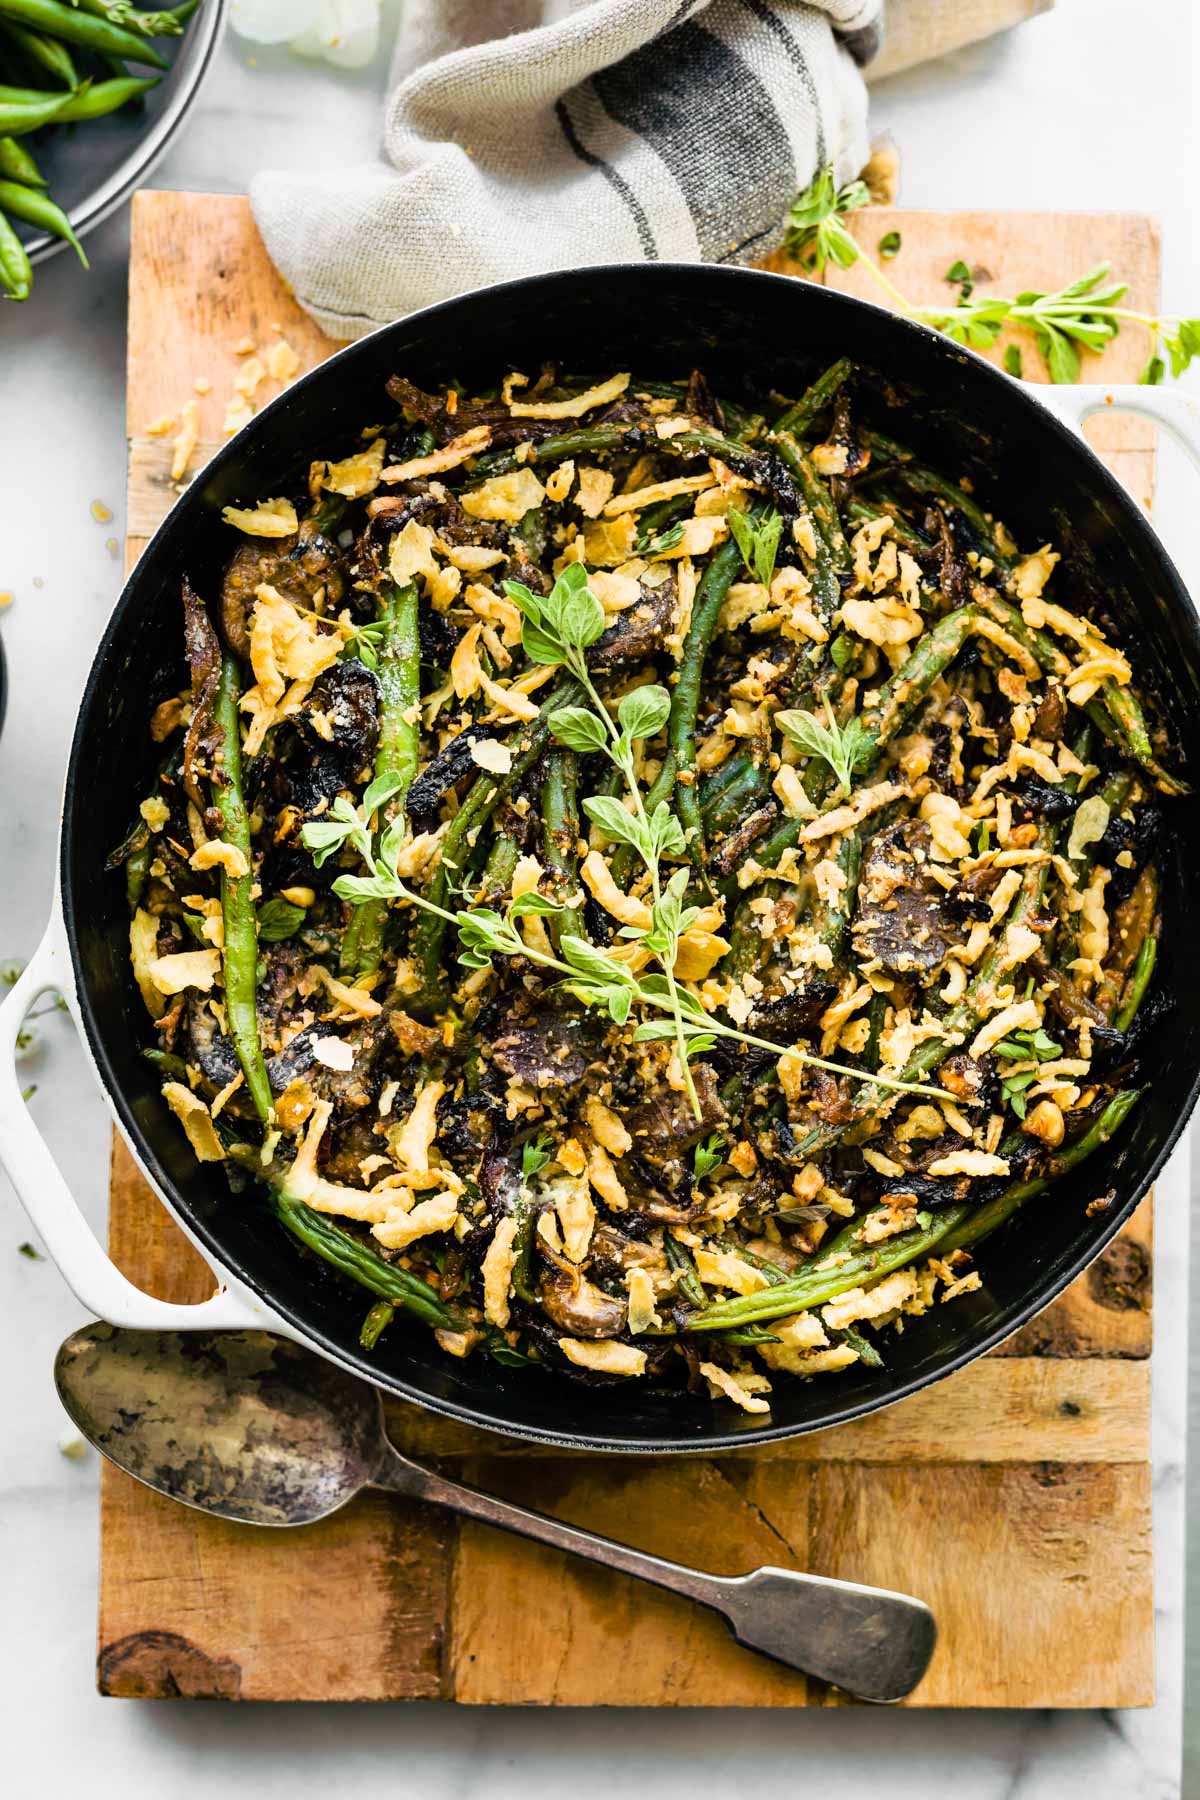 Overhead view skillet filled with baked vegan green bean casserole